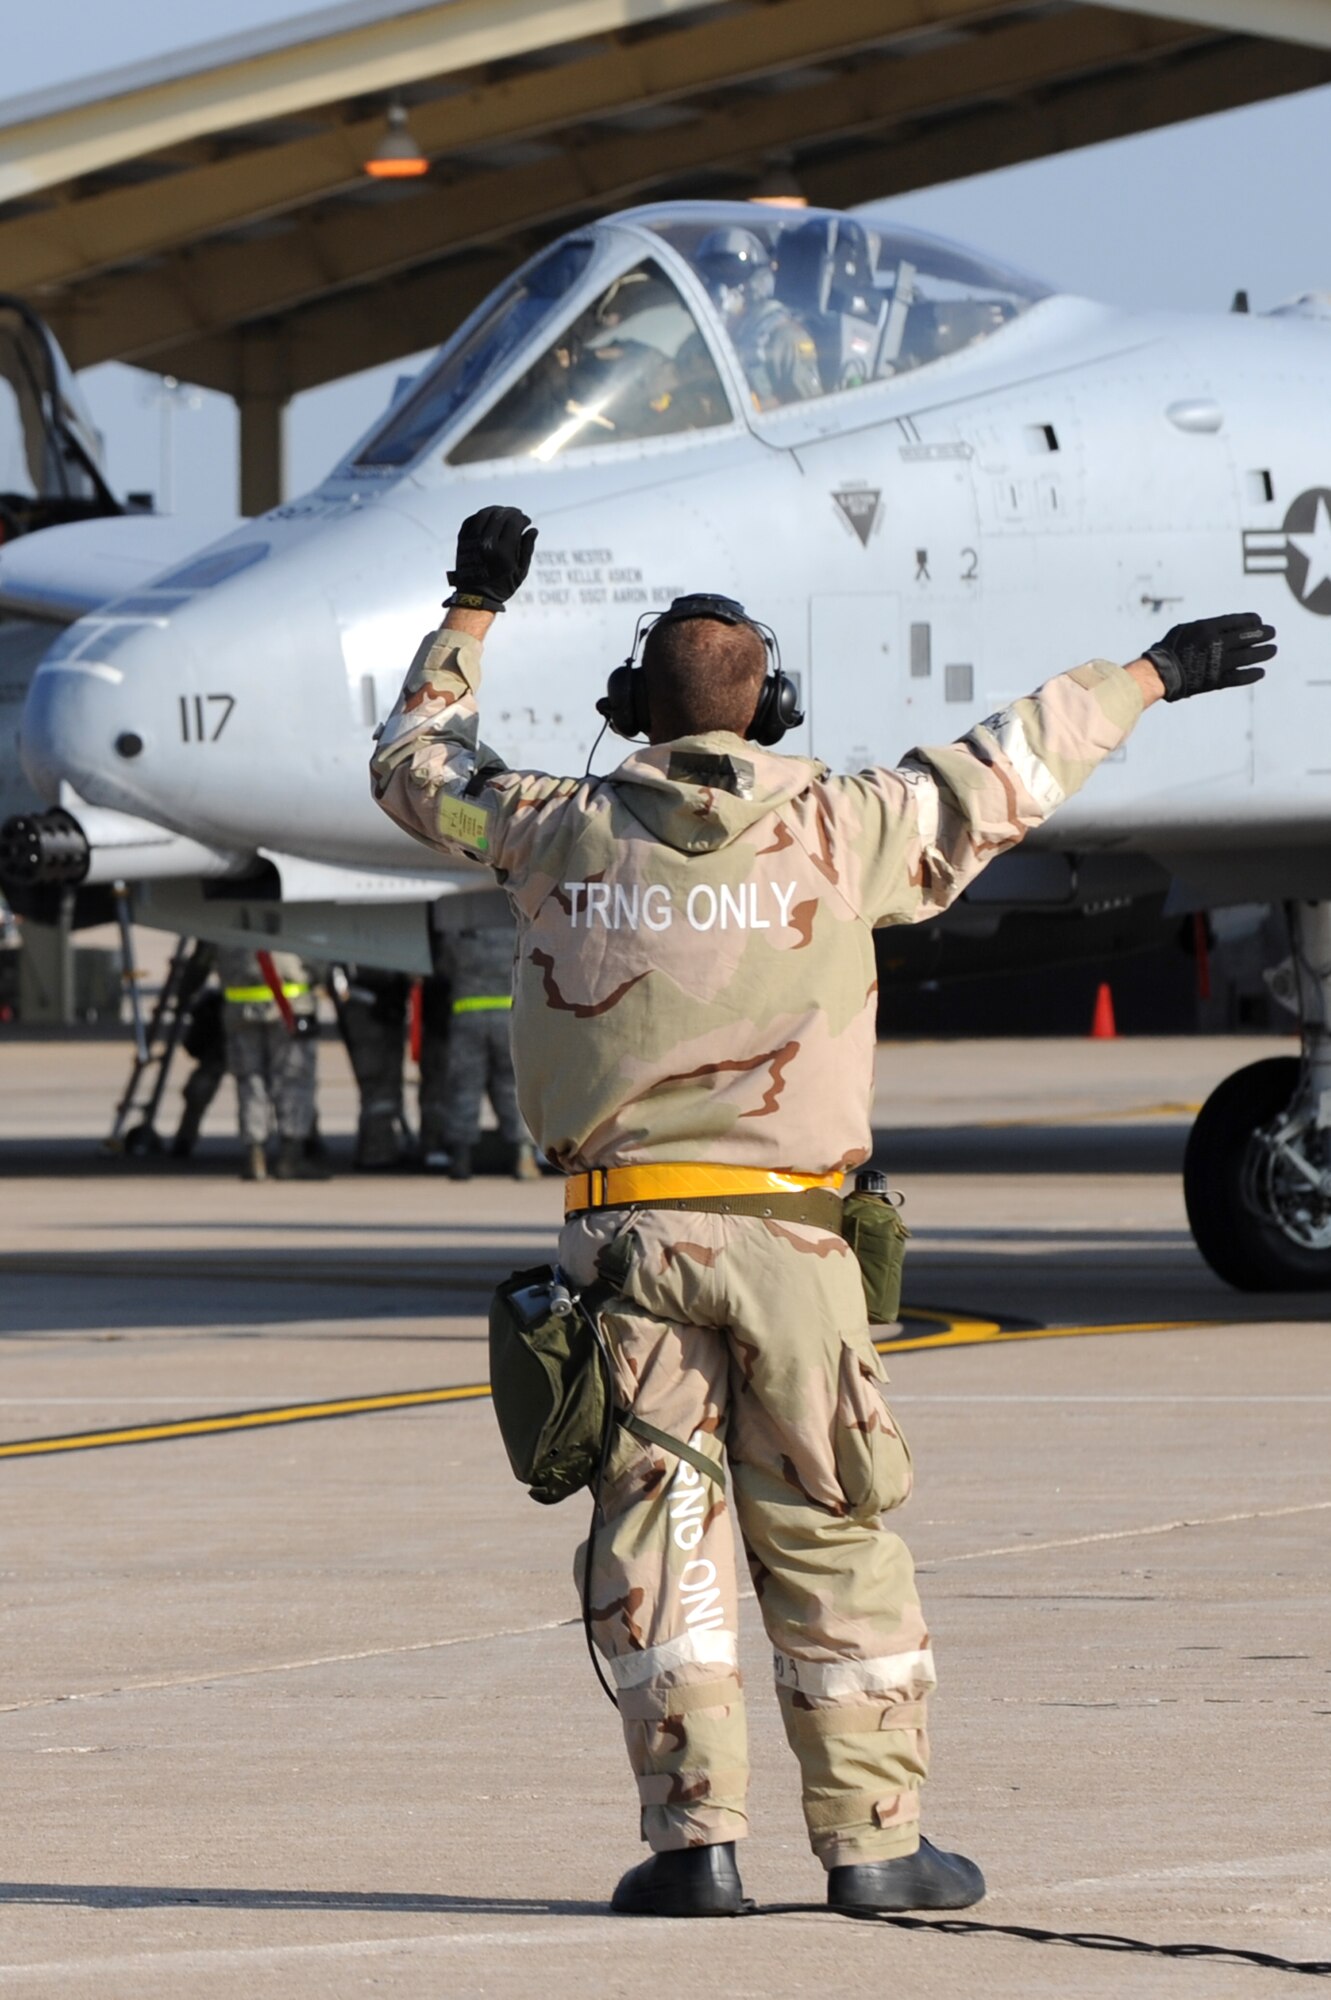 WHITEMAN AIR FORCE BASE, Mo. – A crew chief for the 442nd Fighter Wing signals the pilot of an A-10 Thunderbolt II which way he needs to turn during the Phase II exercise, Sept. 16. The Phase II exercise is an annual mobility exercise, which inspects all areas of 442nd operations. (U.S. Air Force Photo/ SrA Cory Todd)